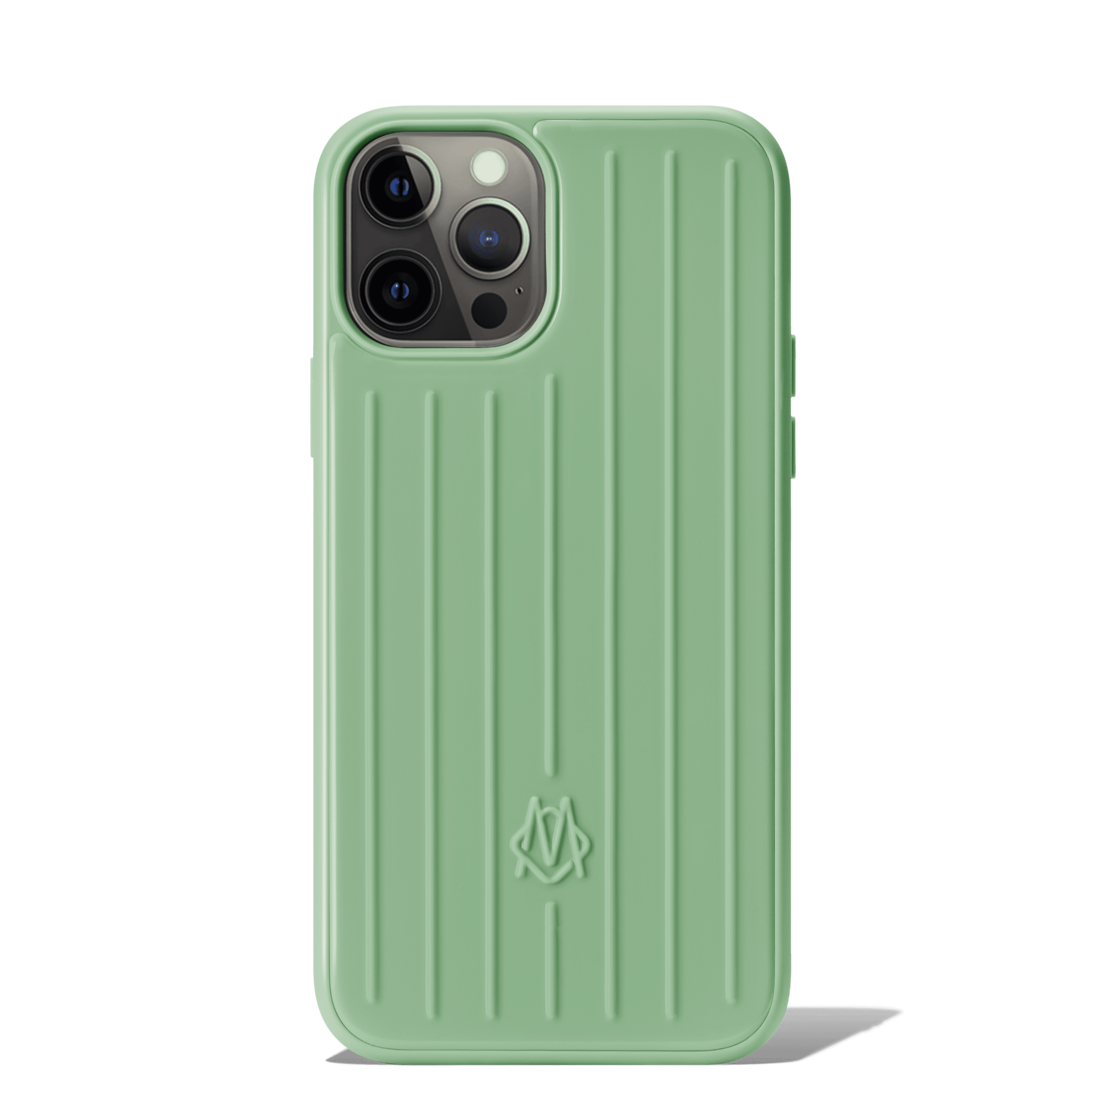 rimowa.com | Bamboo Green Case for iPhone 12 & 12 Pro